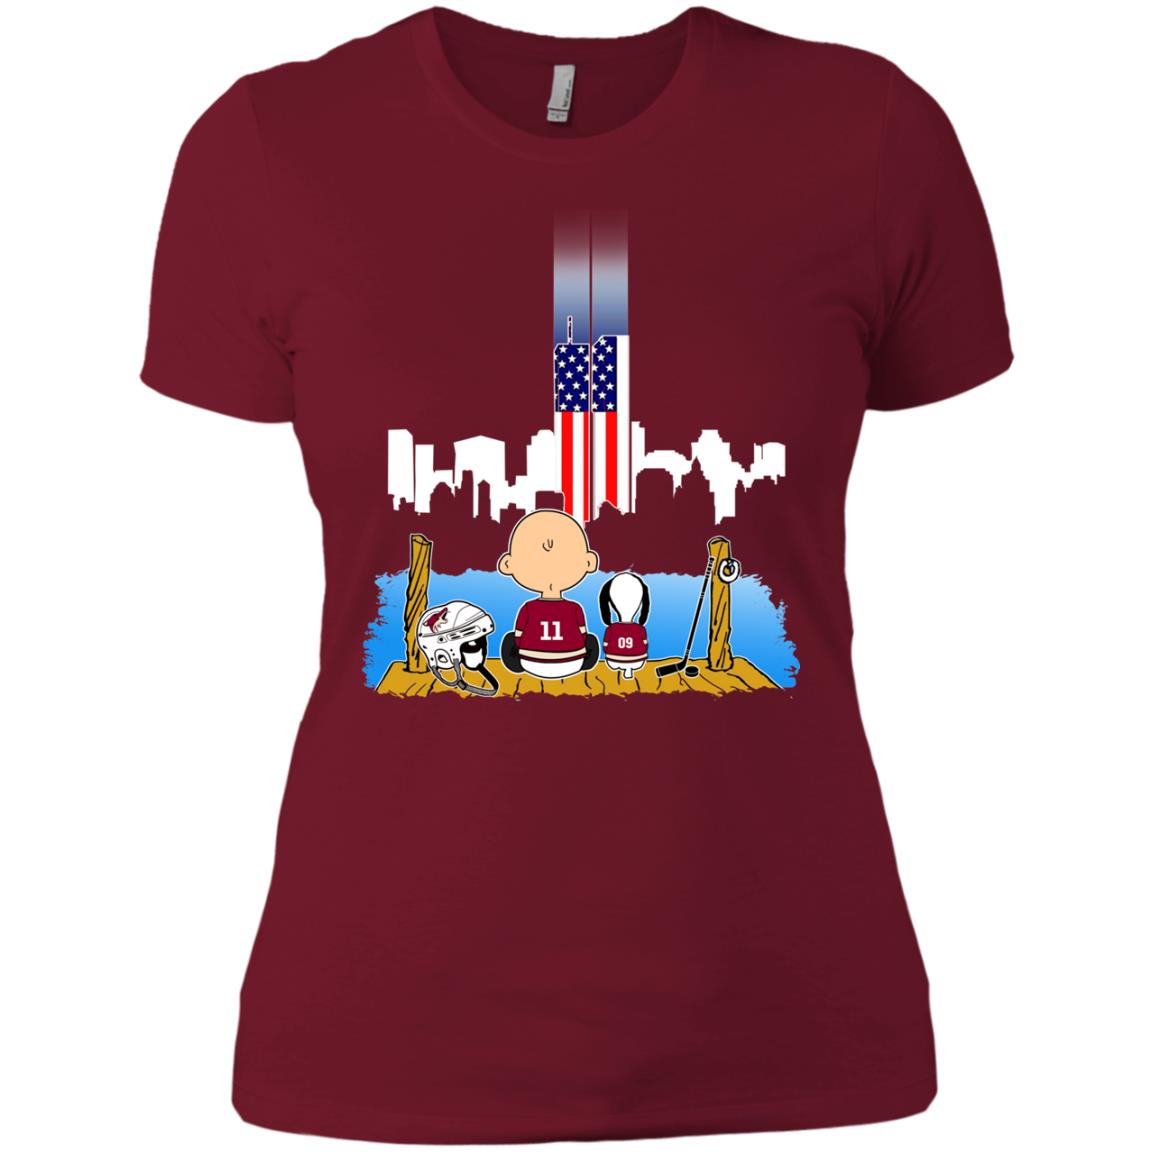 Arizona Coyotes Fans Charlie And Snoopy Never Forget 11 September Memorial T Shirt